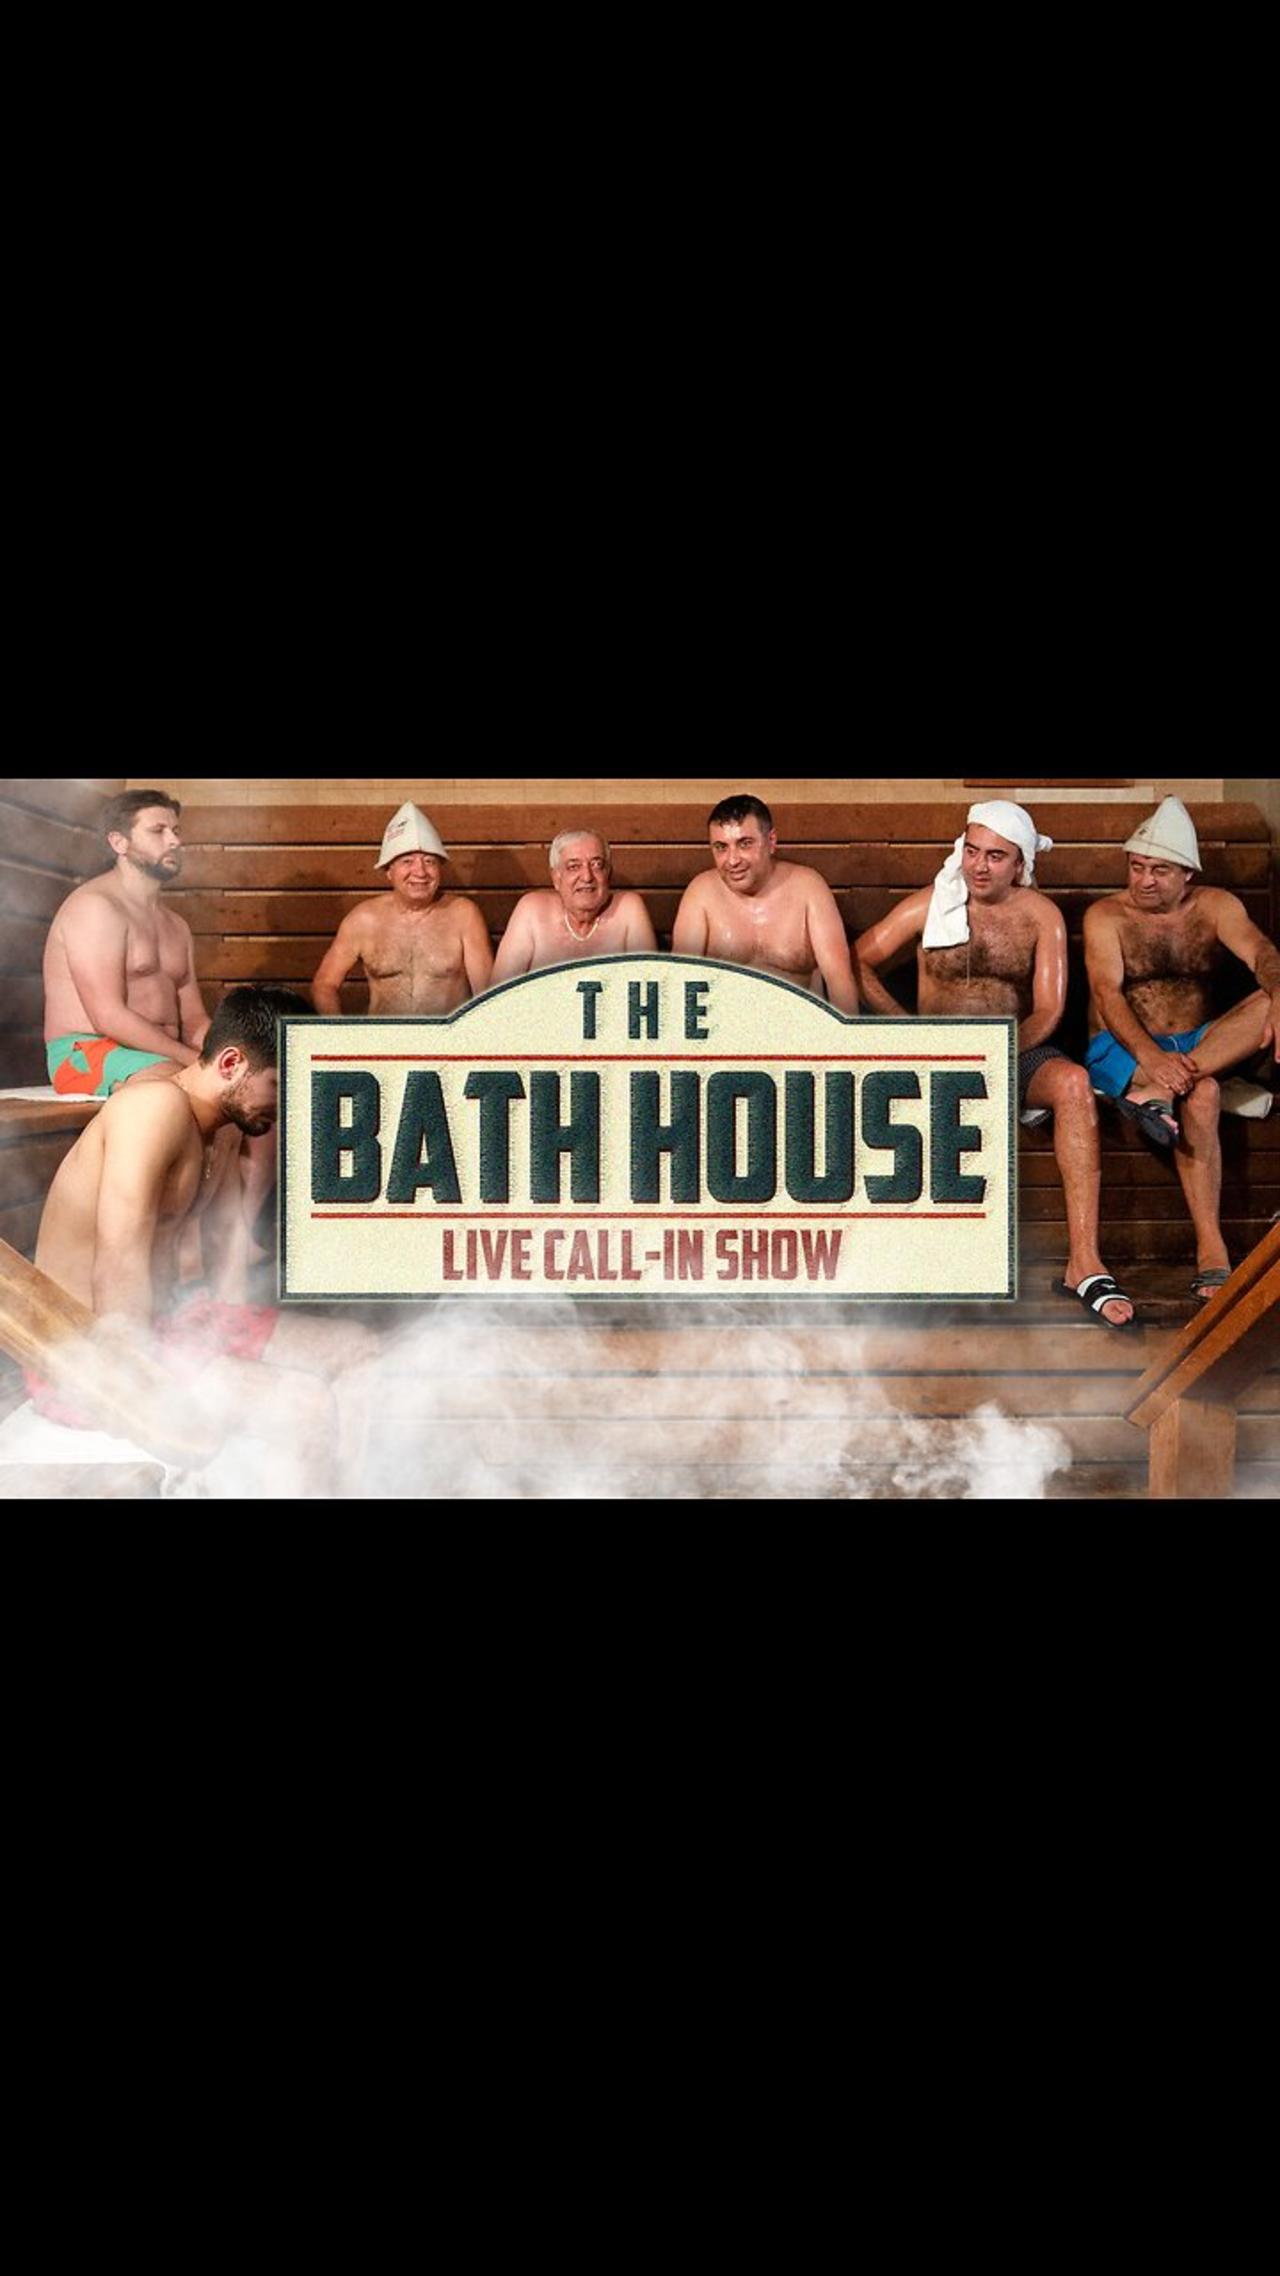 Live From New York! The Bath House Call In Show Live From The Stand Comedy Club Green Room